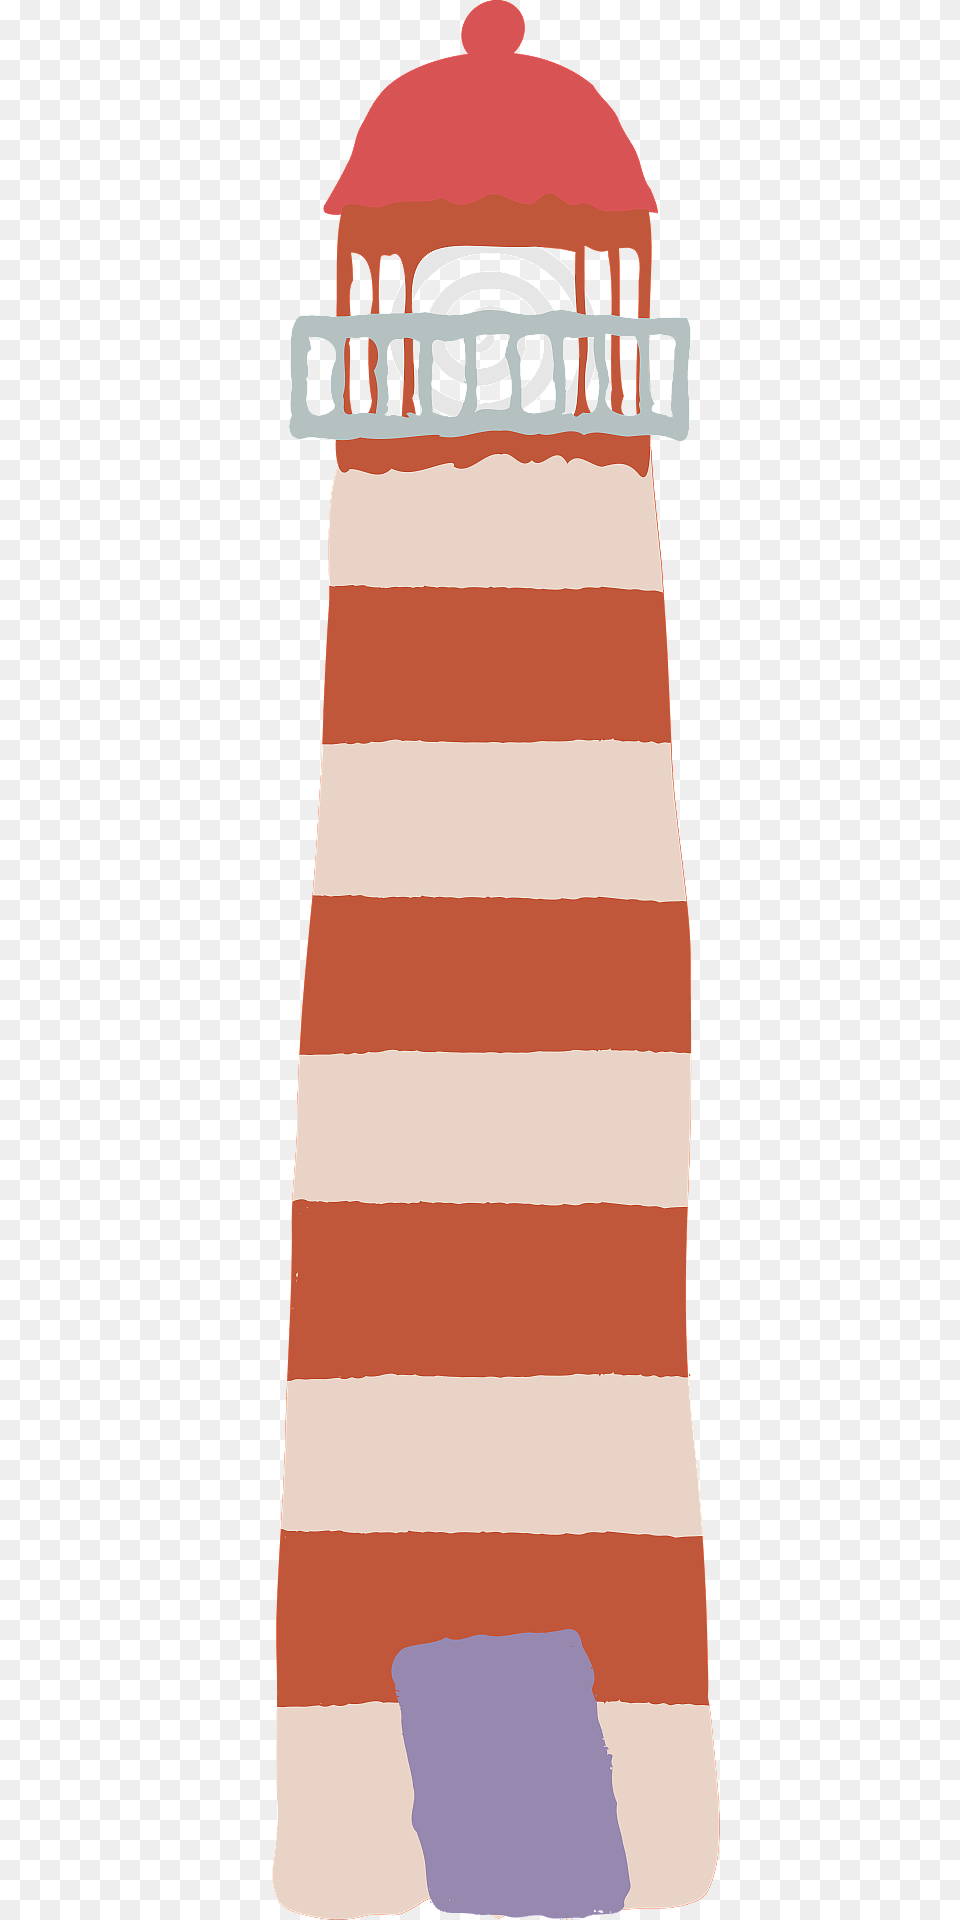 Crooked Red And White Horizontal Stripe Lighthouse Clipart, Clothing, Shirt, T-shirt Png Image